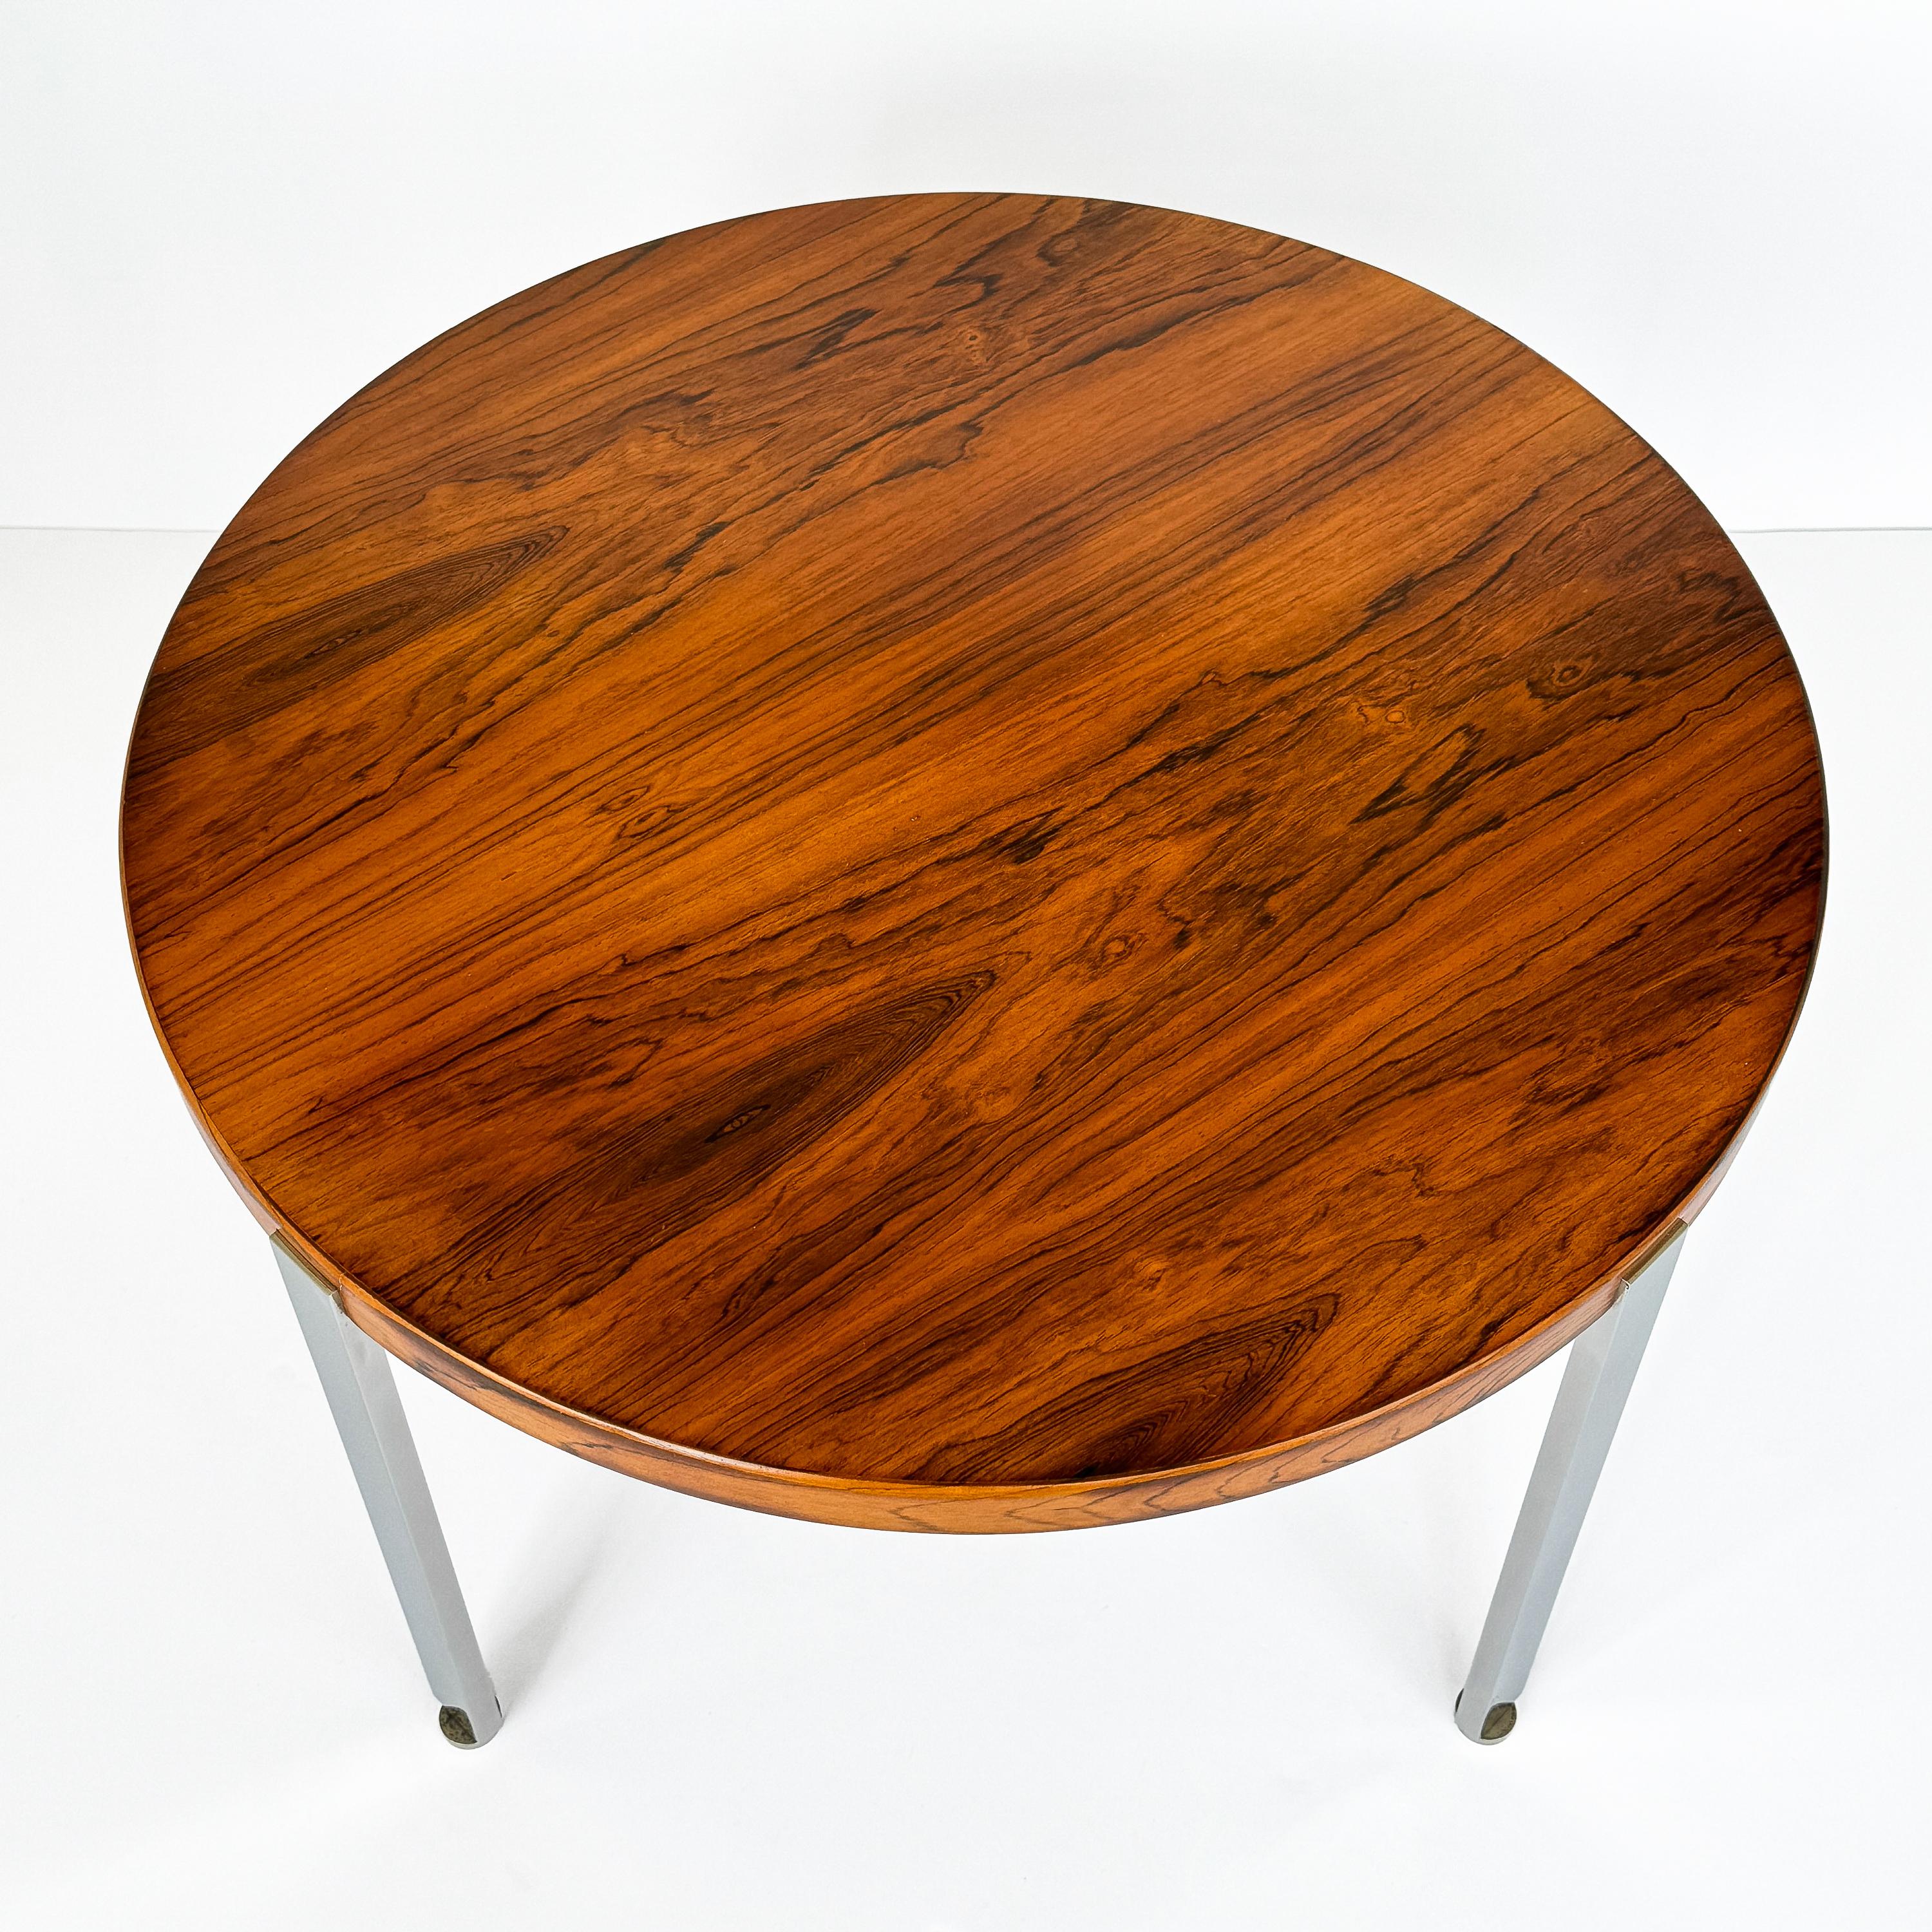 Discover the exquisite interplay of rich wood and polished metal in this Harvey Probber side table from the Architectural Series, a rare find from the United States circa 1960s. This piece is a testament to the enduring elegance of mid-century